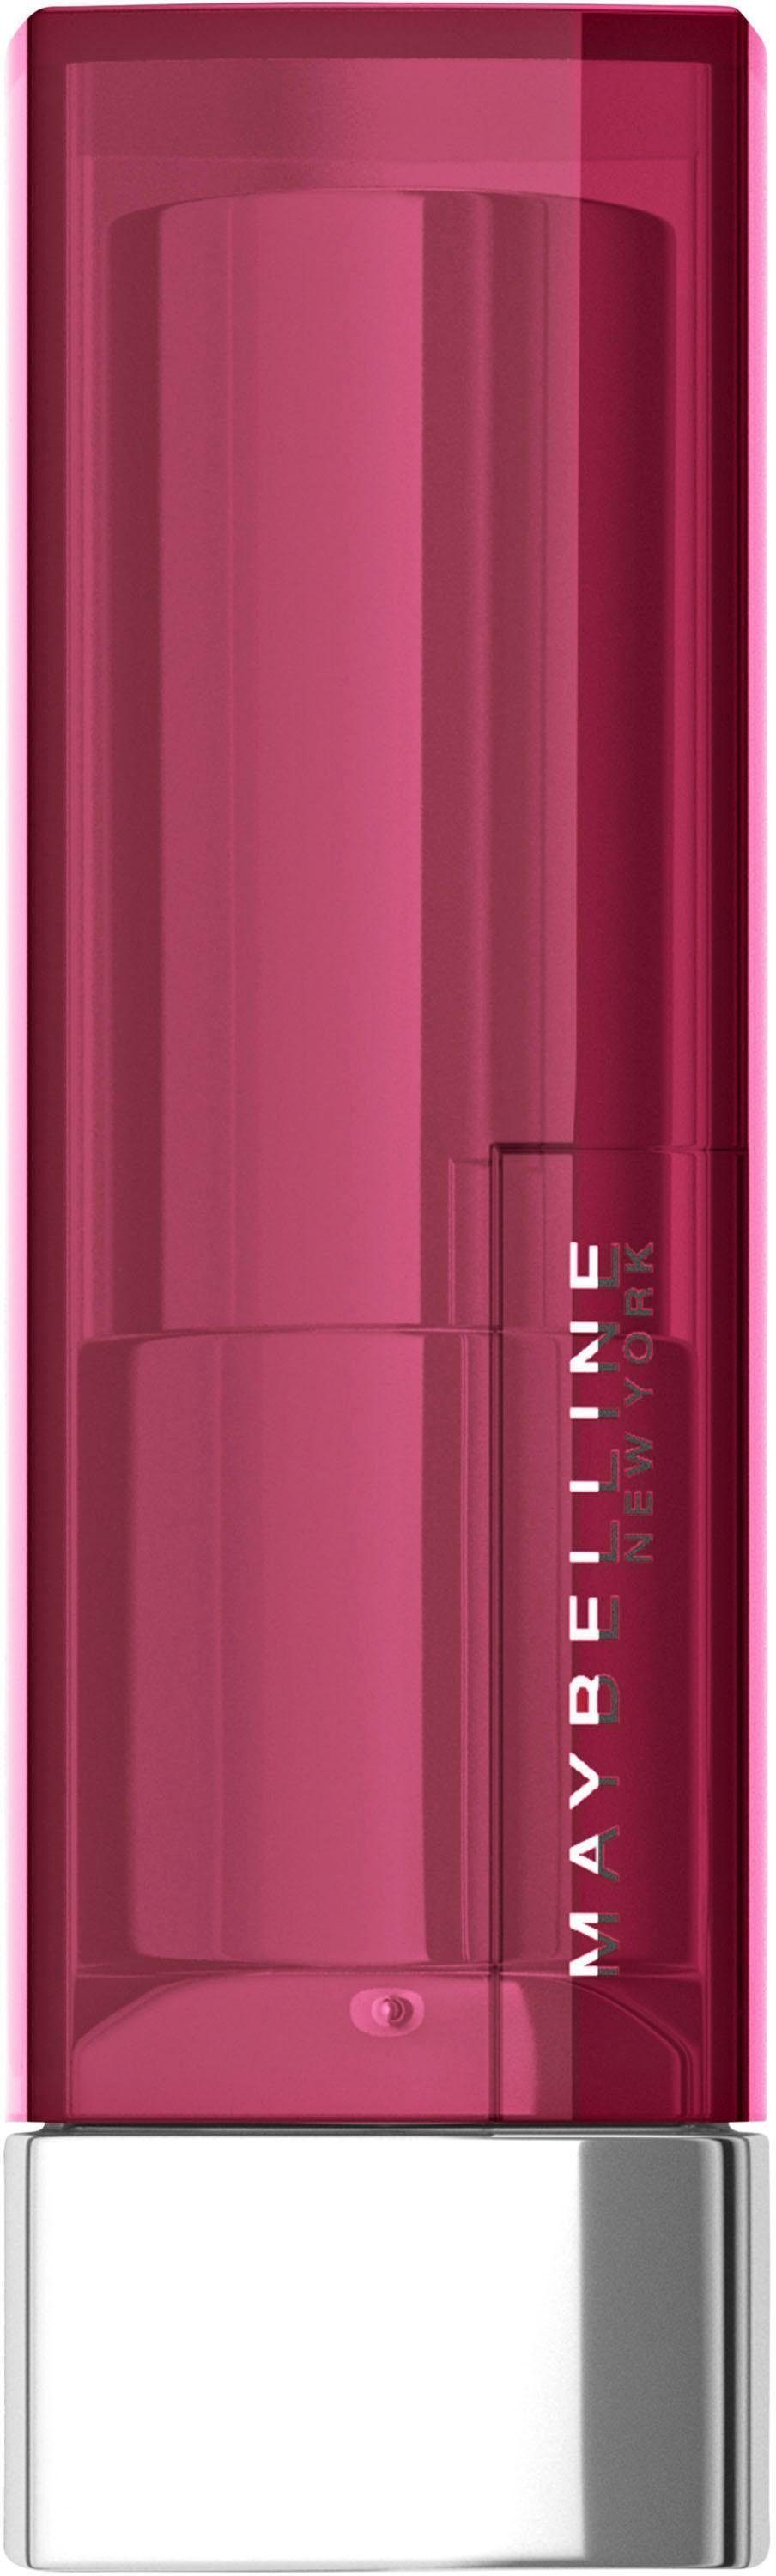 MAYBELLINE Color Creams Pink the Lippenstift YORK NEW Thrill Sensational 266